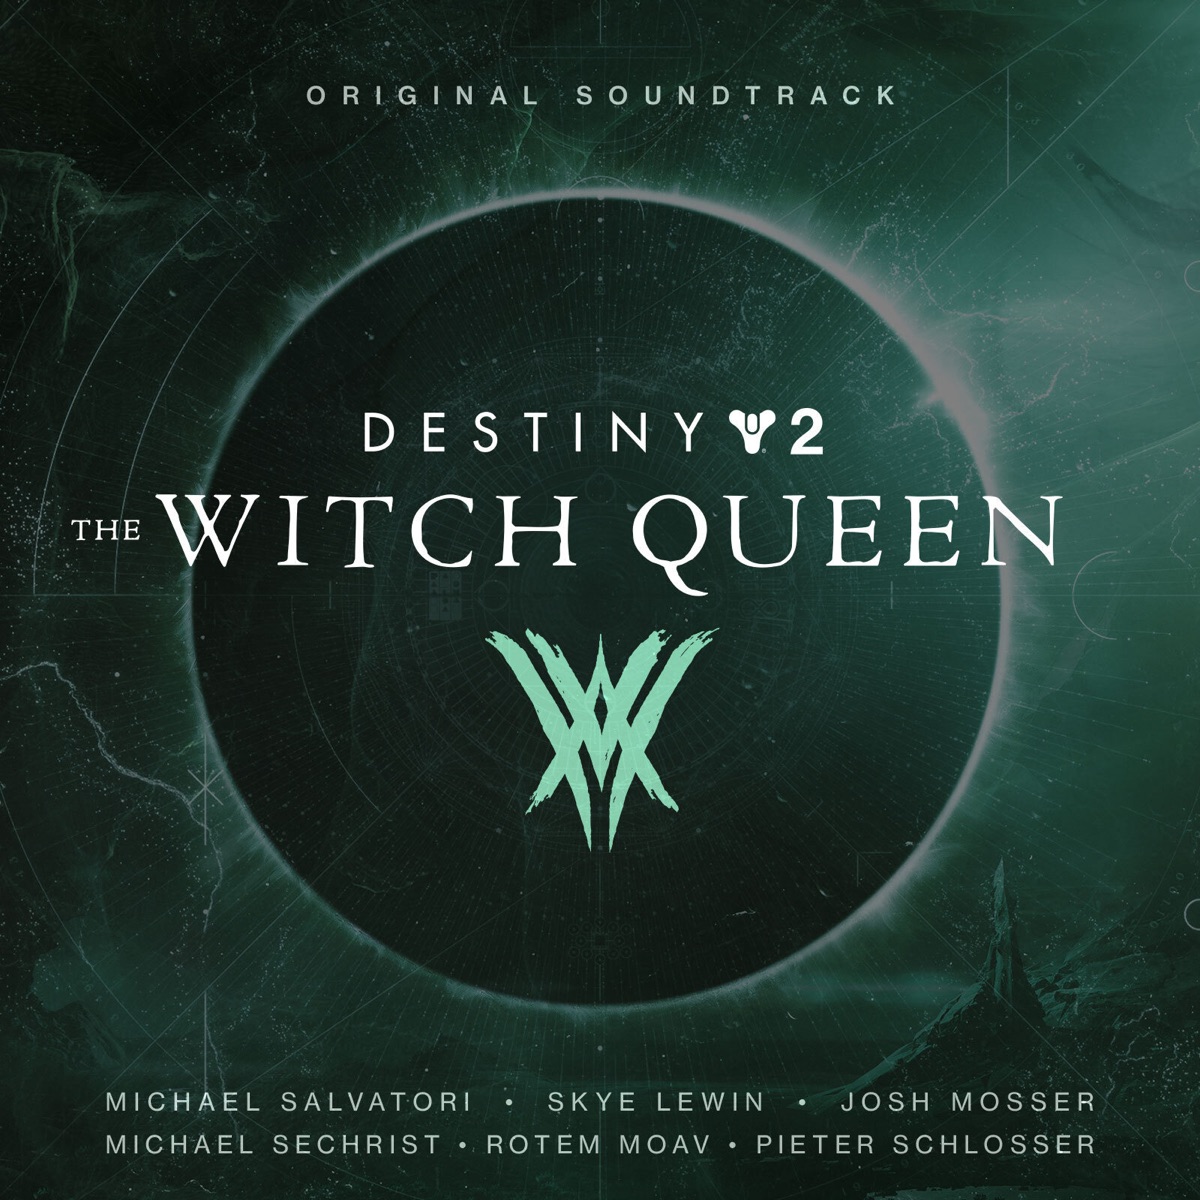 Destiny 2: The Witch Queen (Original Soundtrack) - Album by Various Artists  - Apple Music